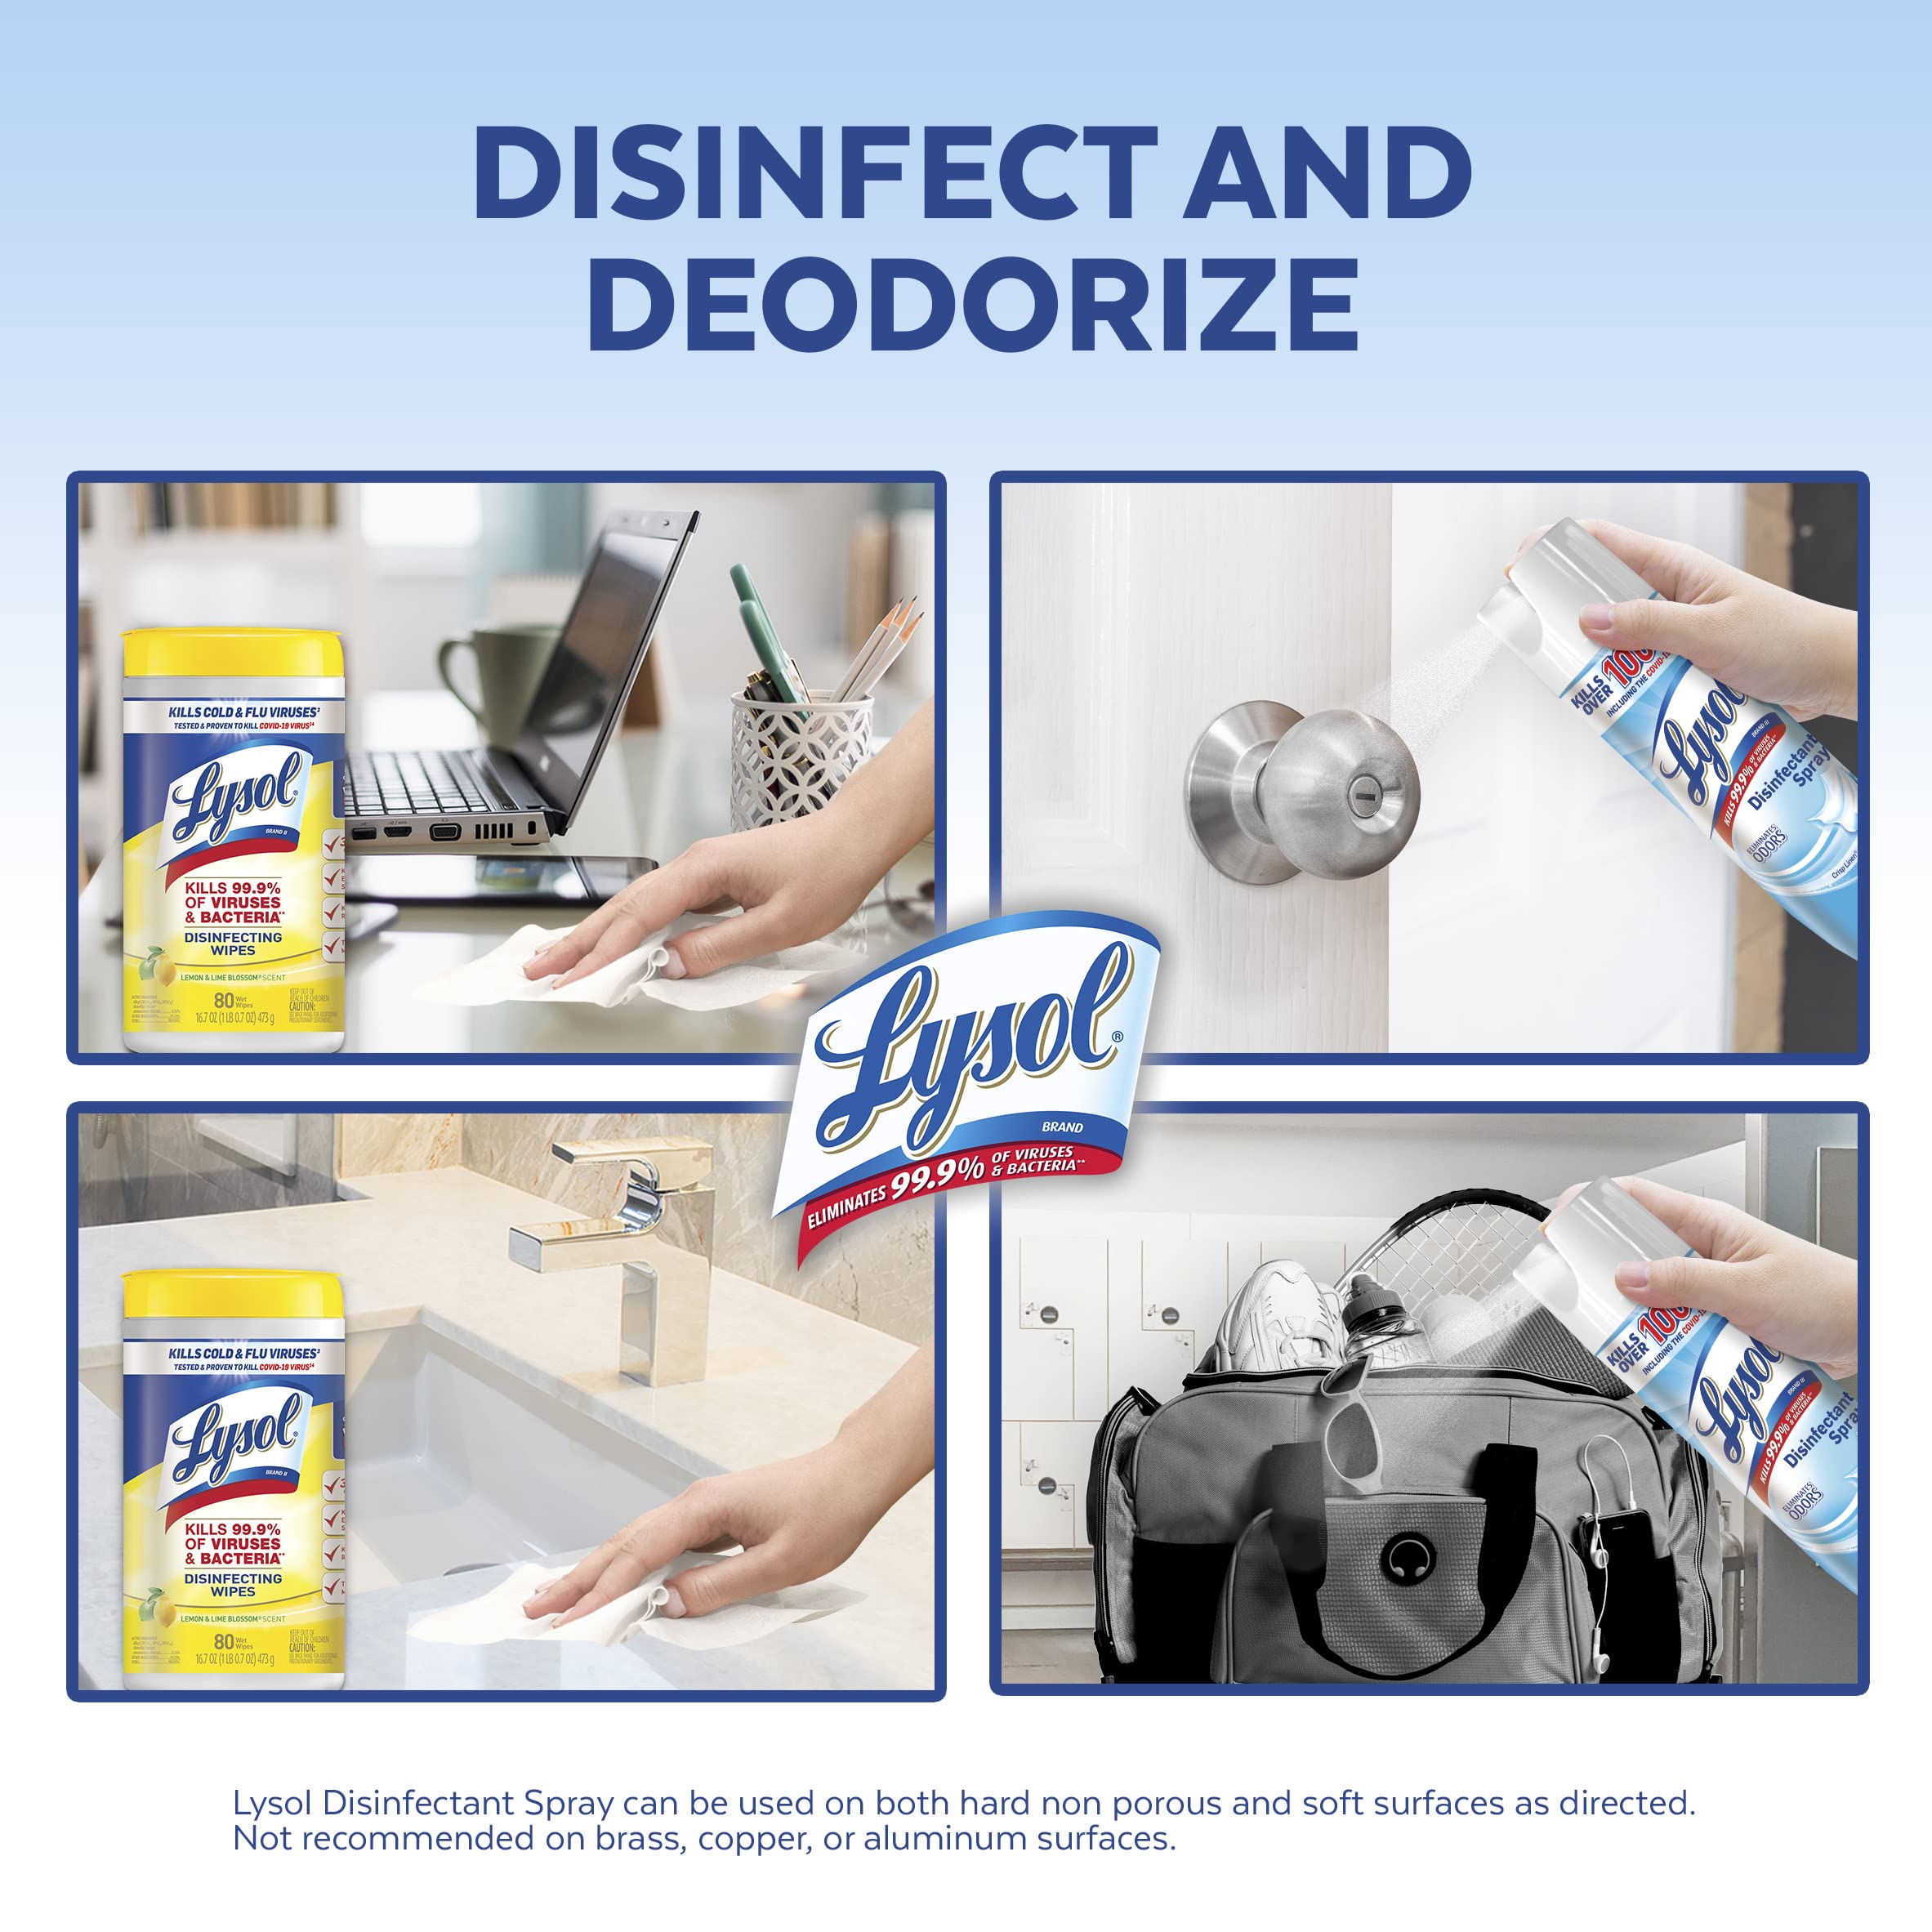 Lysol Disinfectant Multi-Surface Cleaning Wipes, Lemon and Lime Blossom, 80 Count (Pack of 4) Sanitizing Spray, Crisp Linen, 19 Fl Oz Each 2)